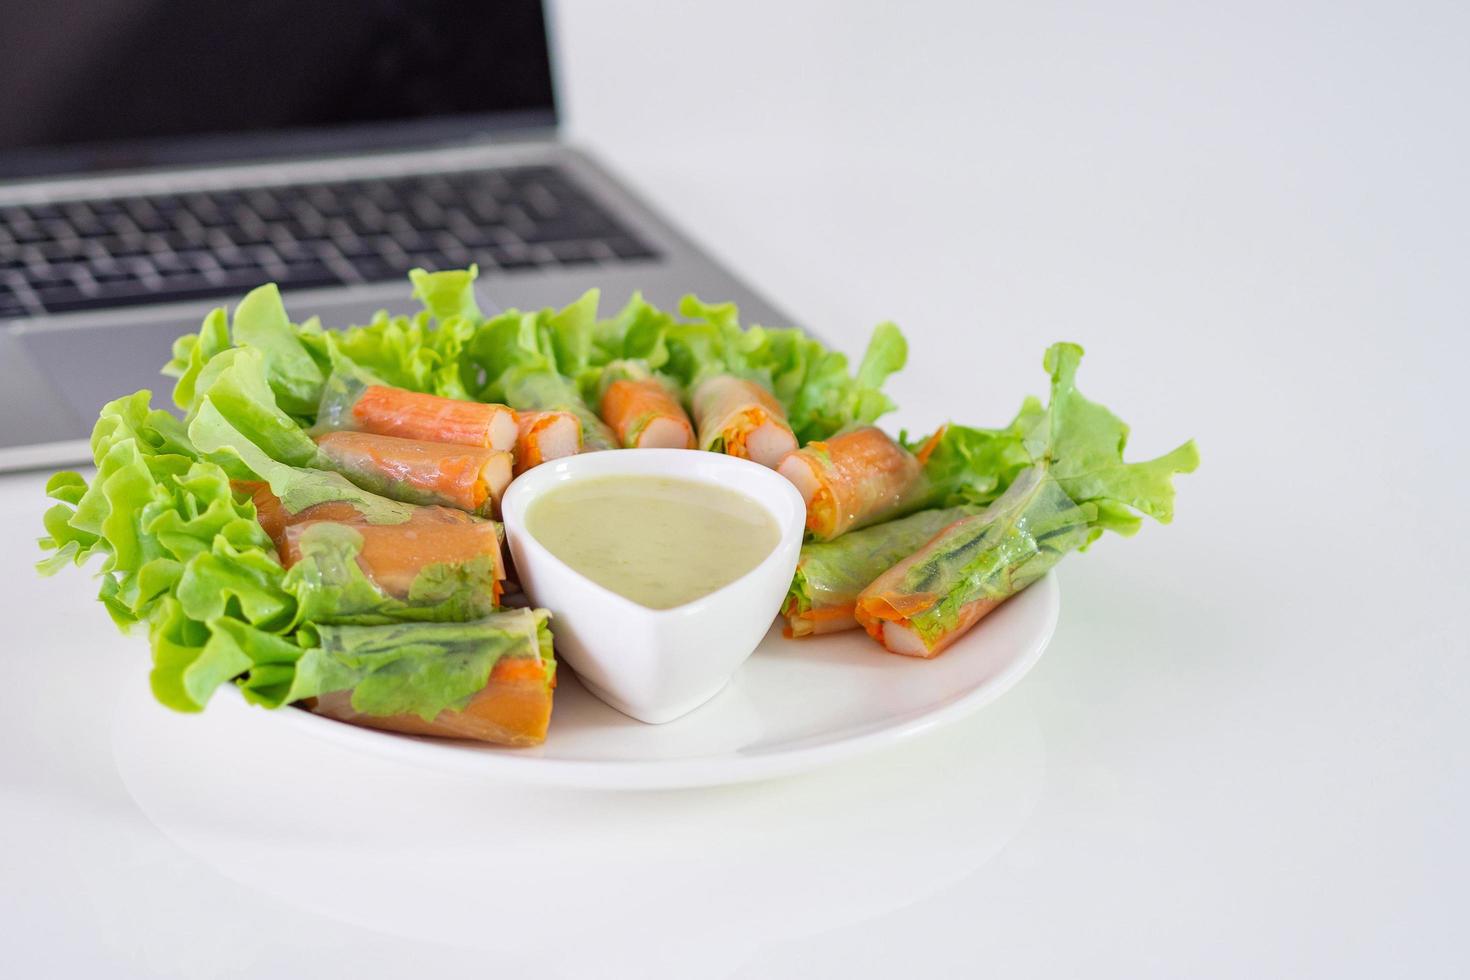 Crab stick and vegetables salad in noodle tube on white dish near laptop photo